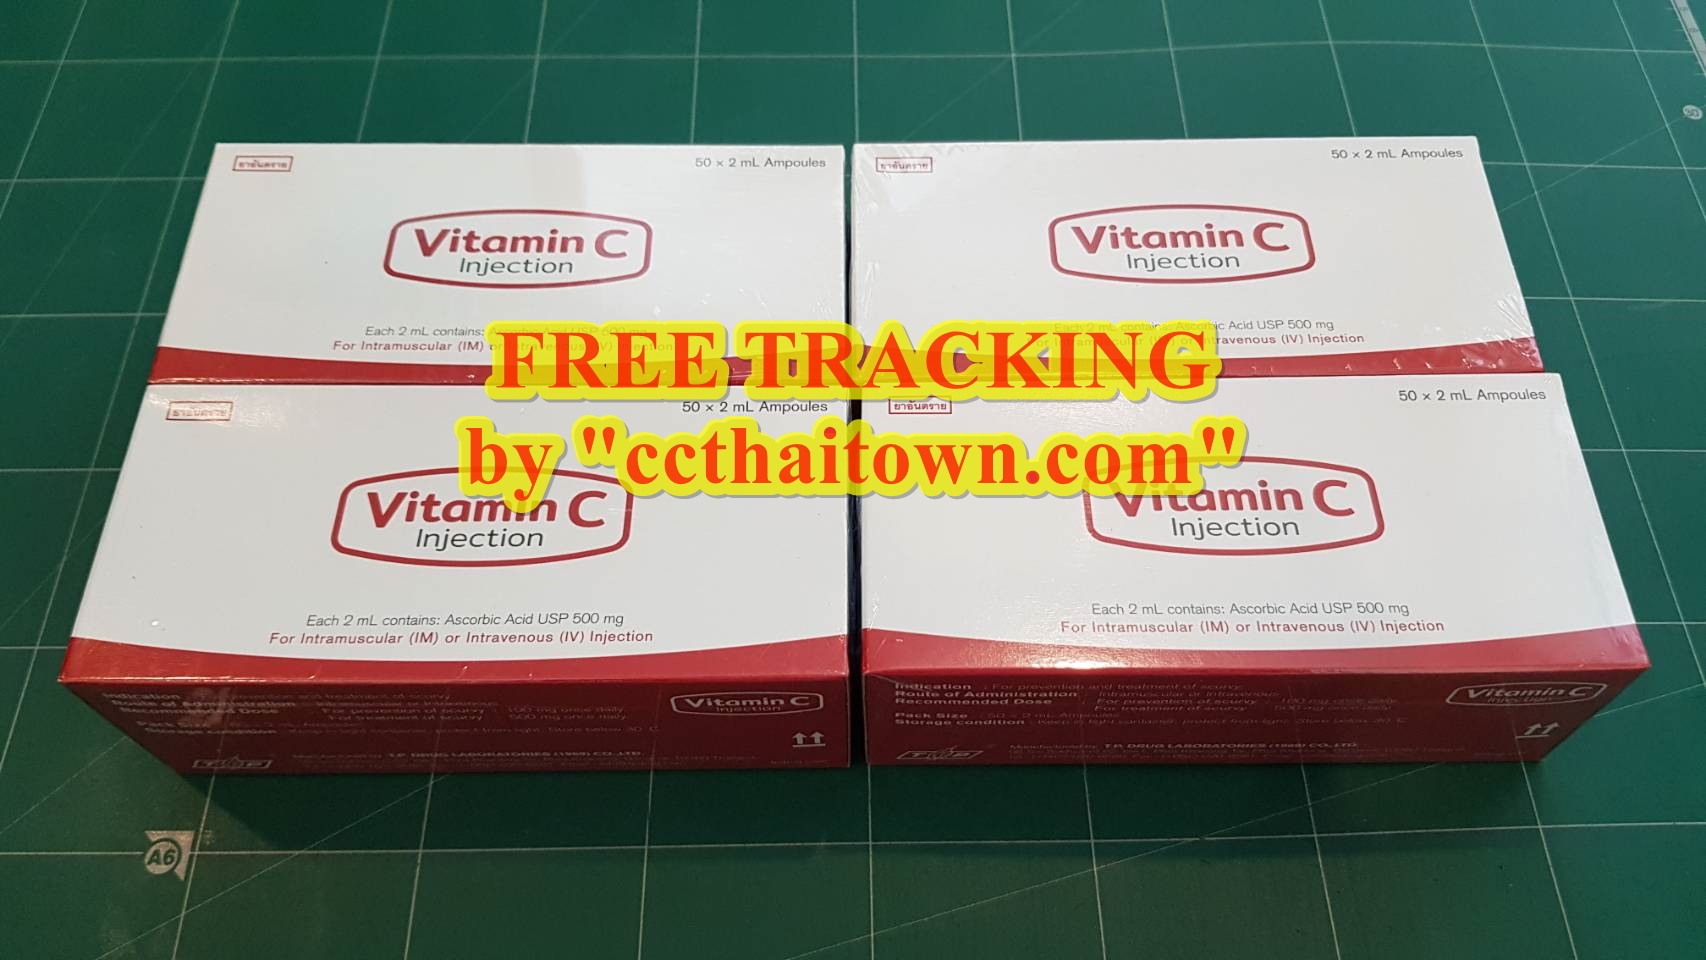 RED V-C INJECTION 100% PURE VITAMIN C INJECTION AMPOULE ASCORBIC SKIN CARE ANTI-AGING Injection 50 AMP by www.ccthaitown.com